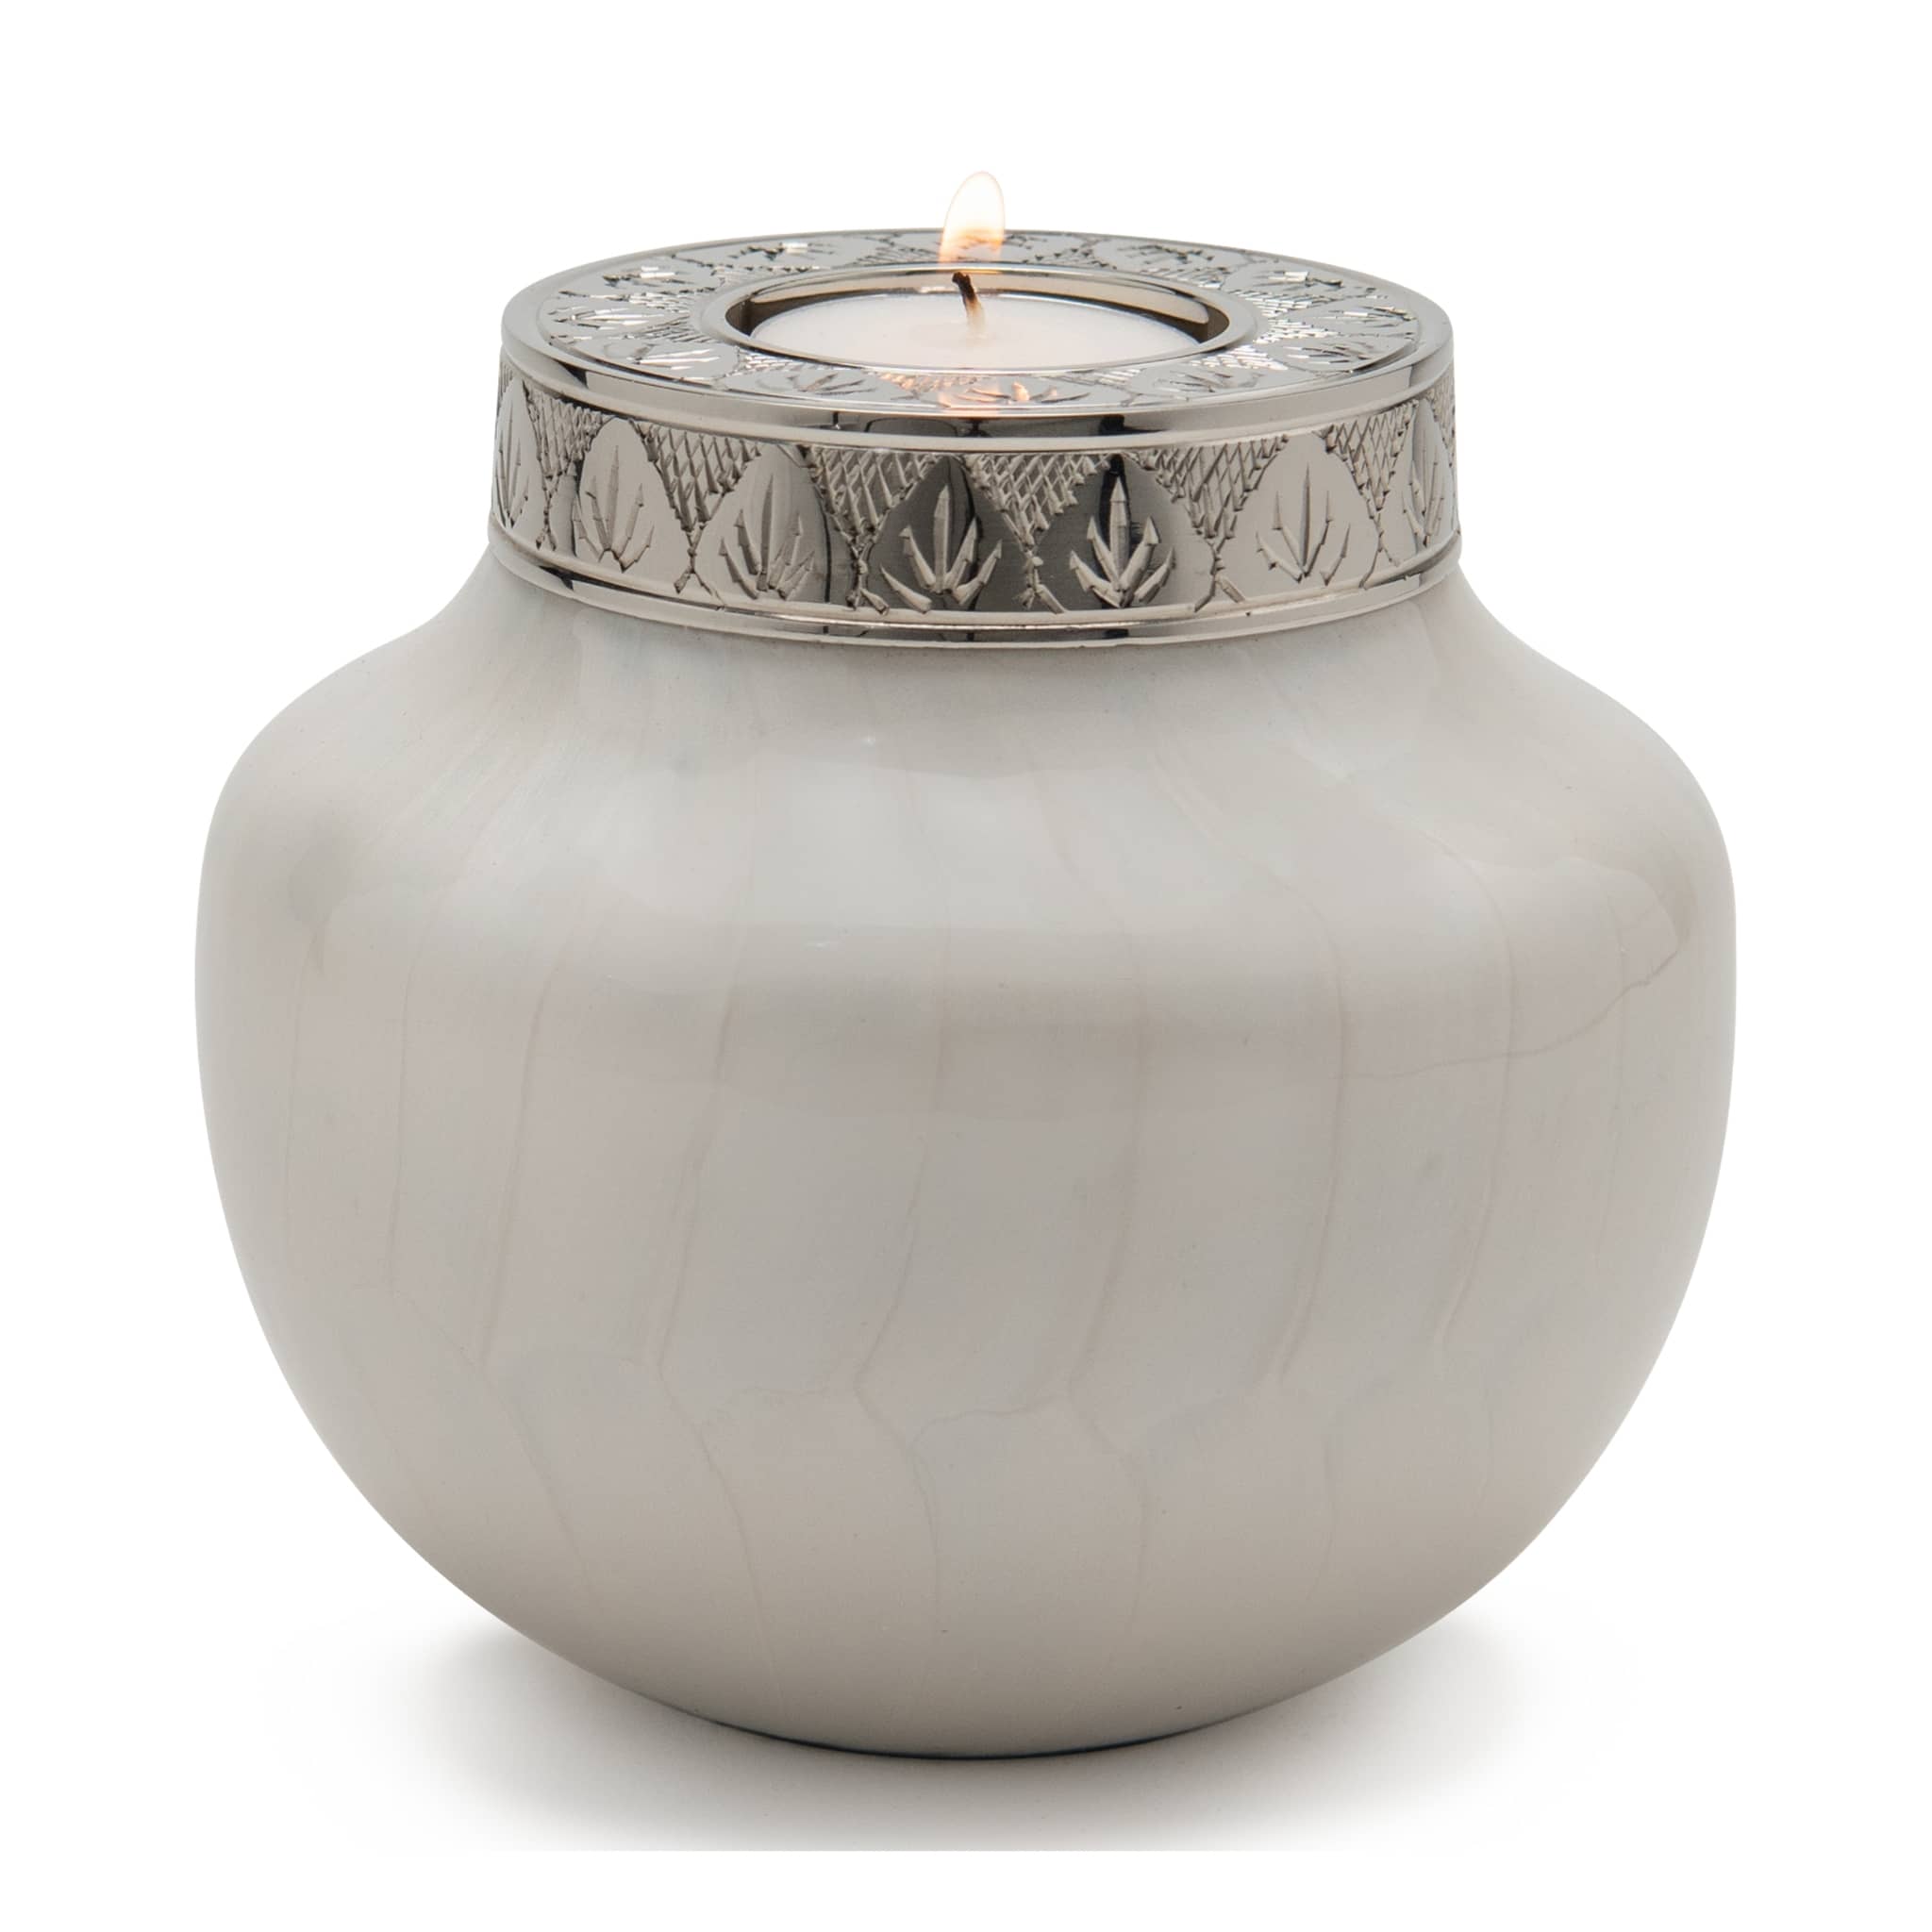 Small Cremation Urns and Keepsake Urns